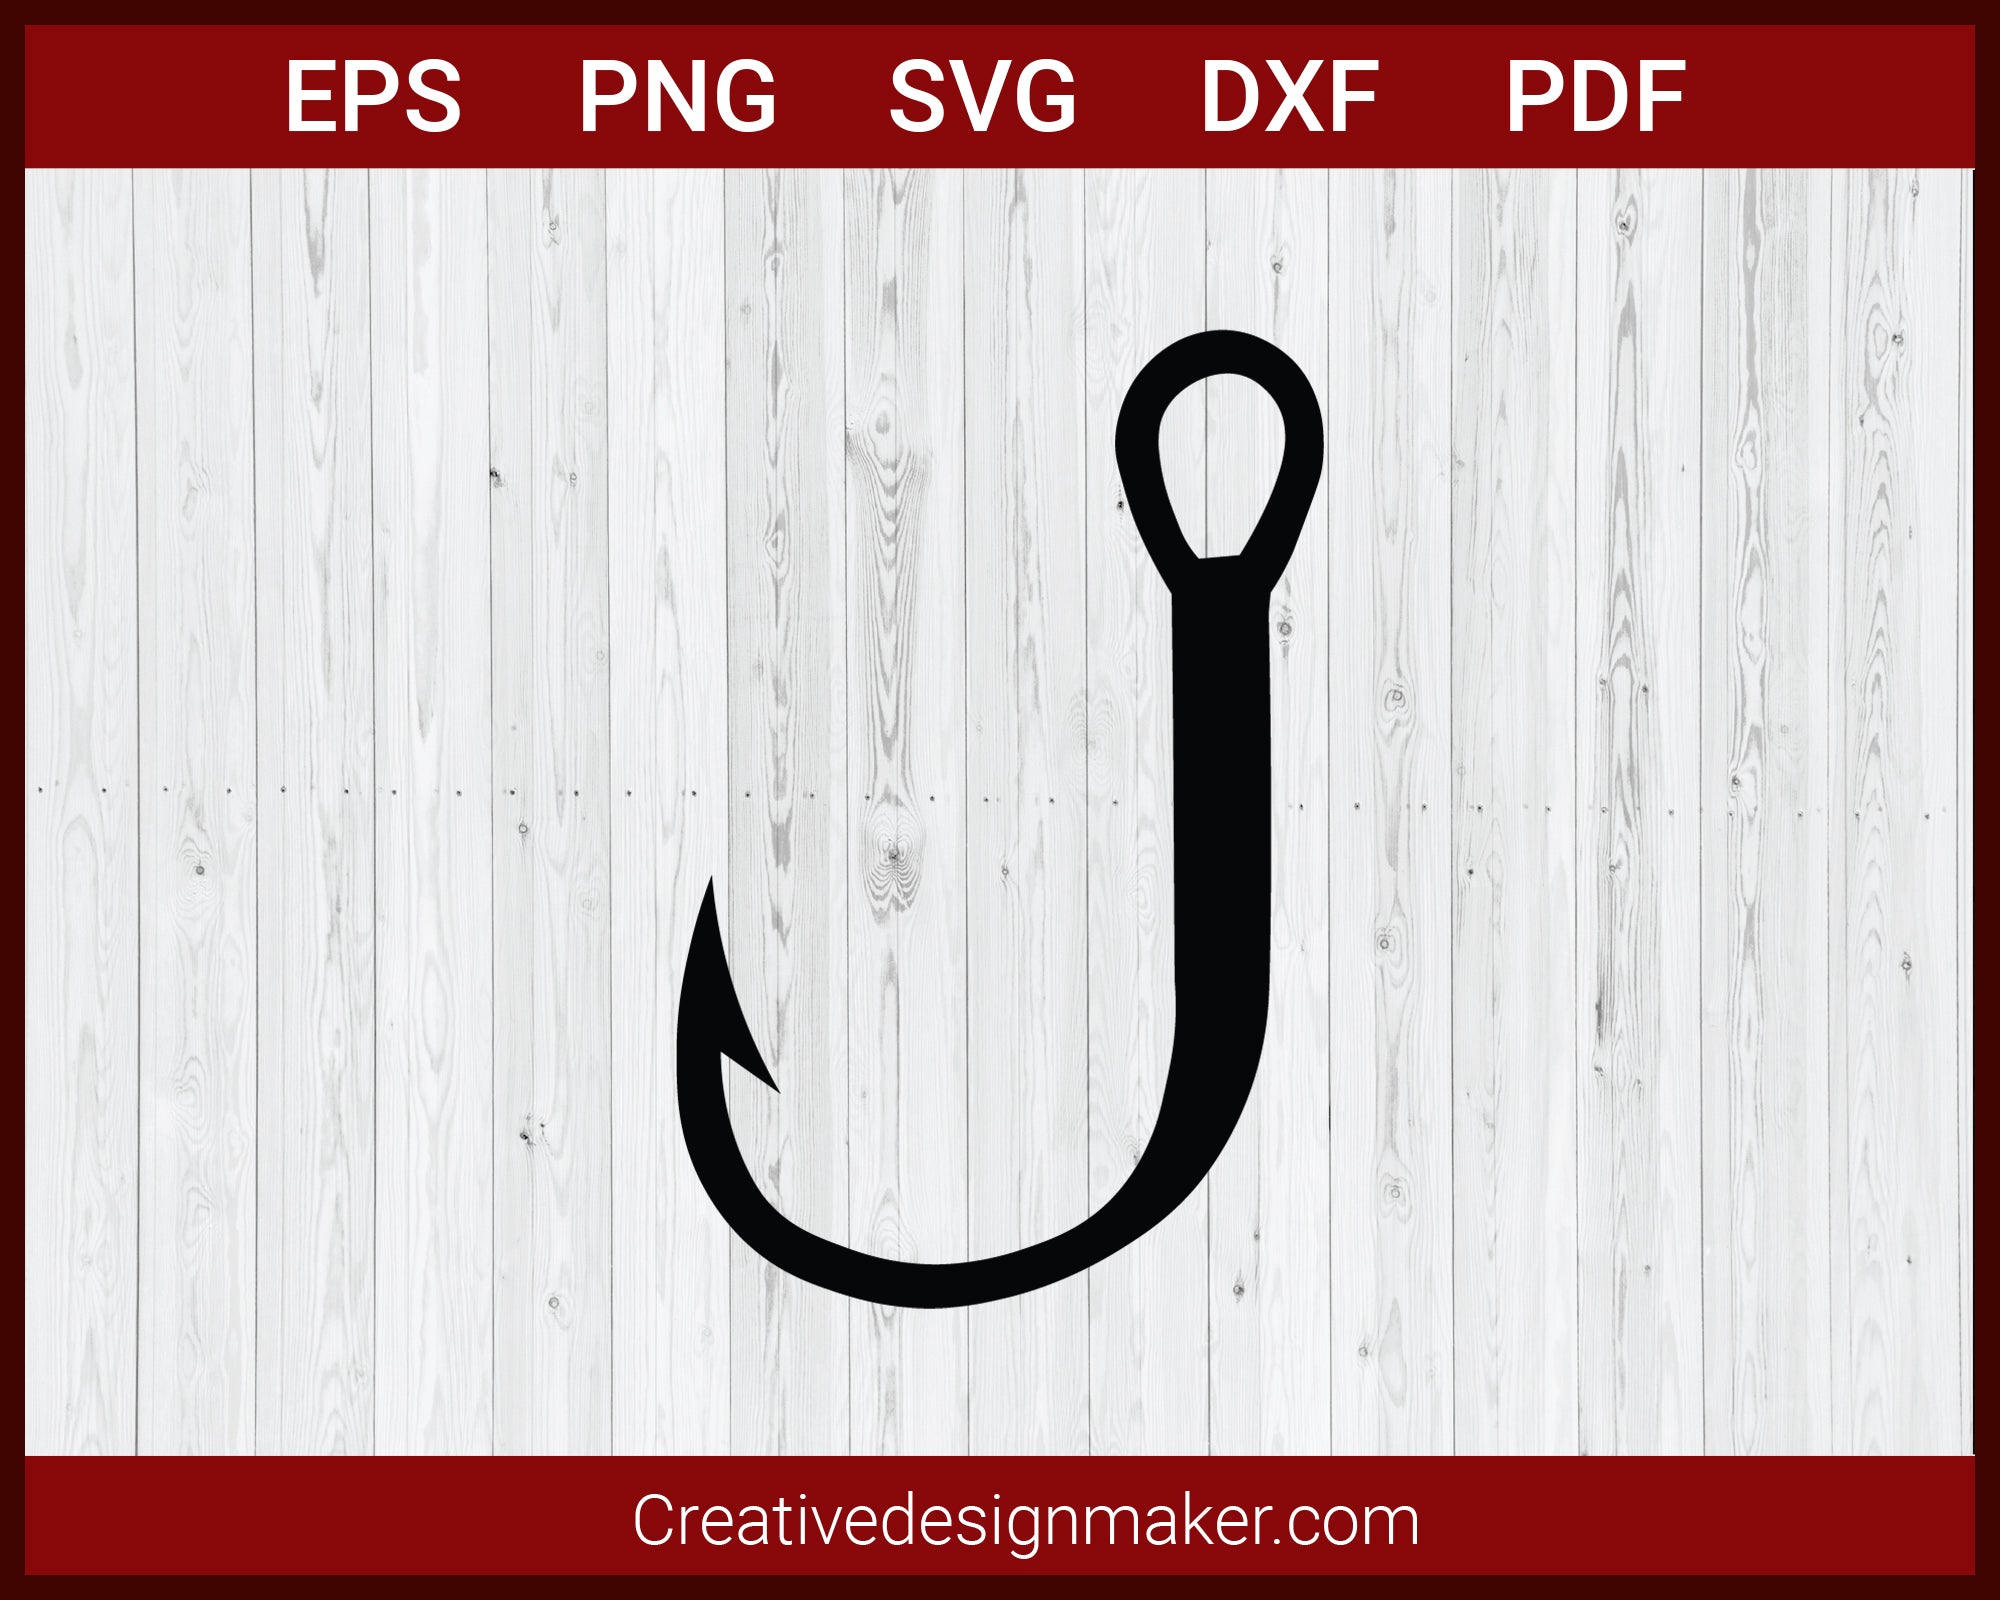 Download Fishing Fish Hook Svg Cricut Silhouette Dxf Png Eps Cut File Creativedesignmaker